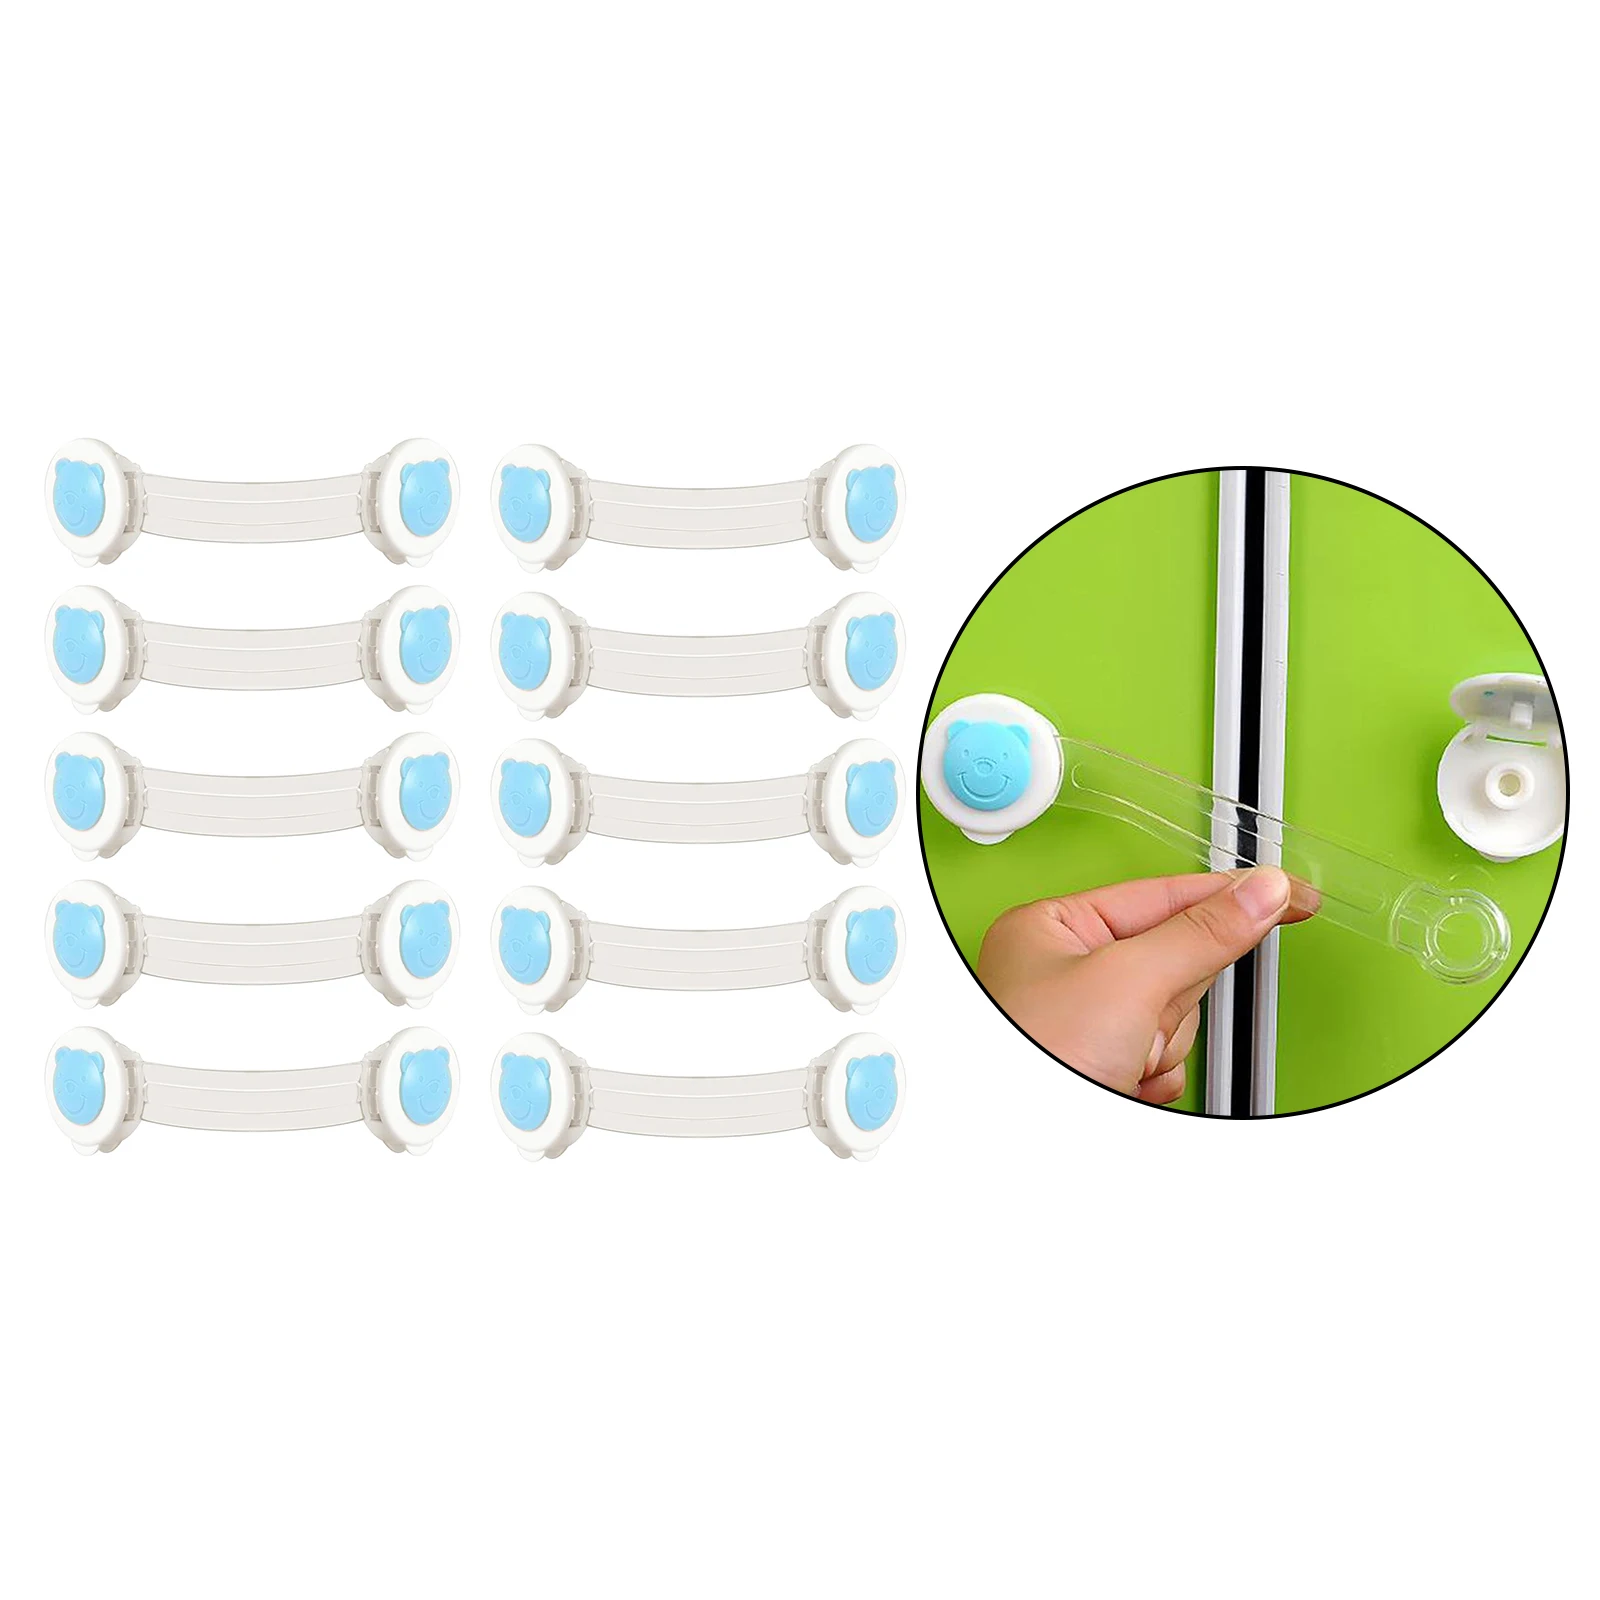 10x Safety Strap Locks Child Baby Locks for Cabinets Drawers Toilet Fridge Easy to Install No Drilling Required